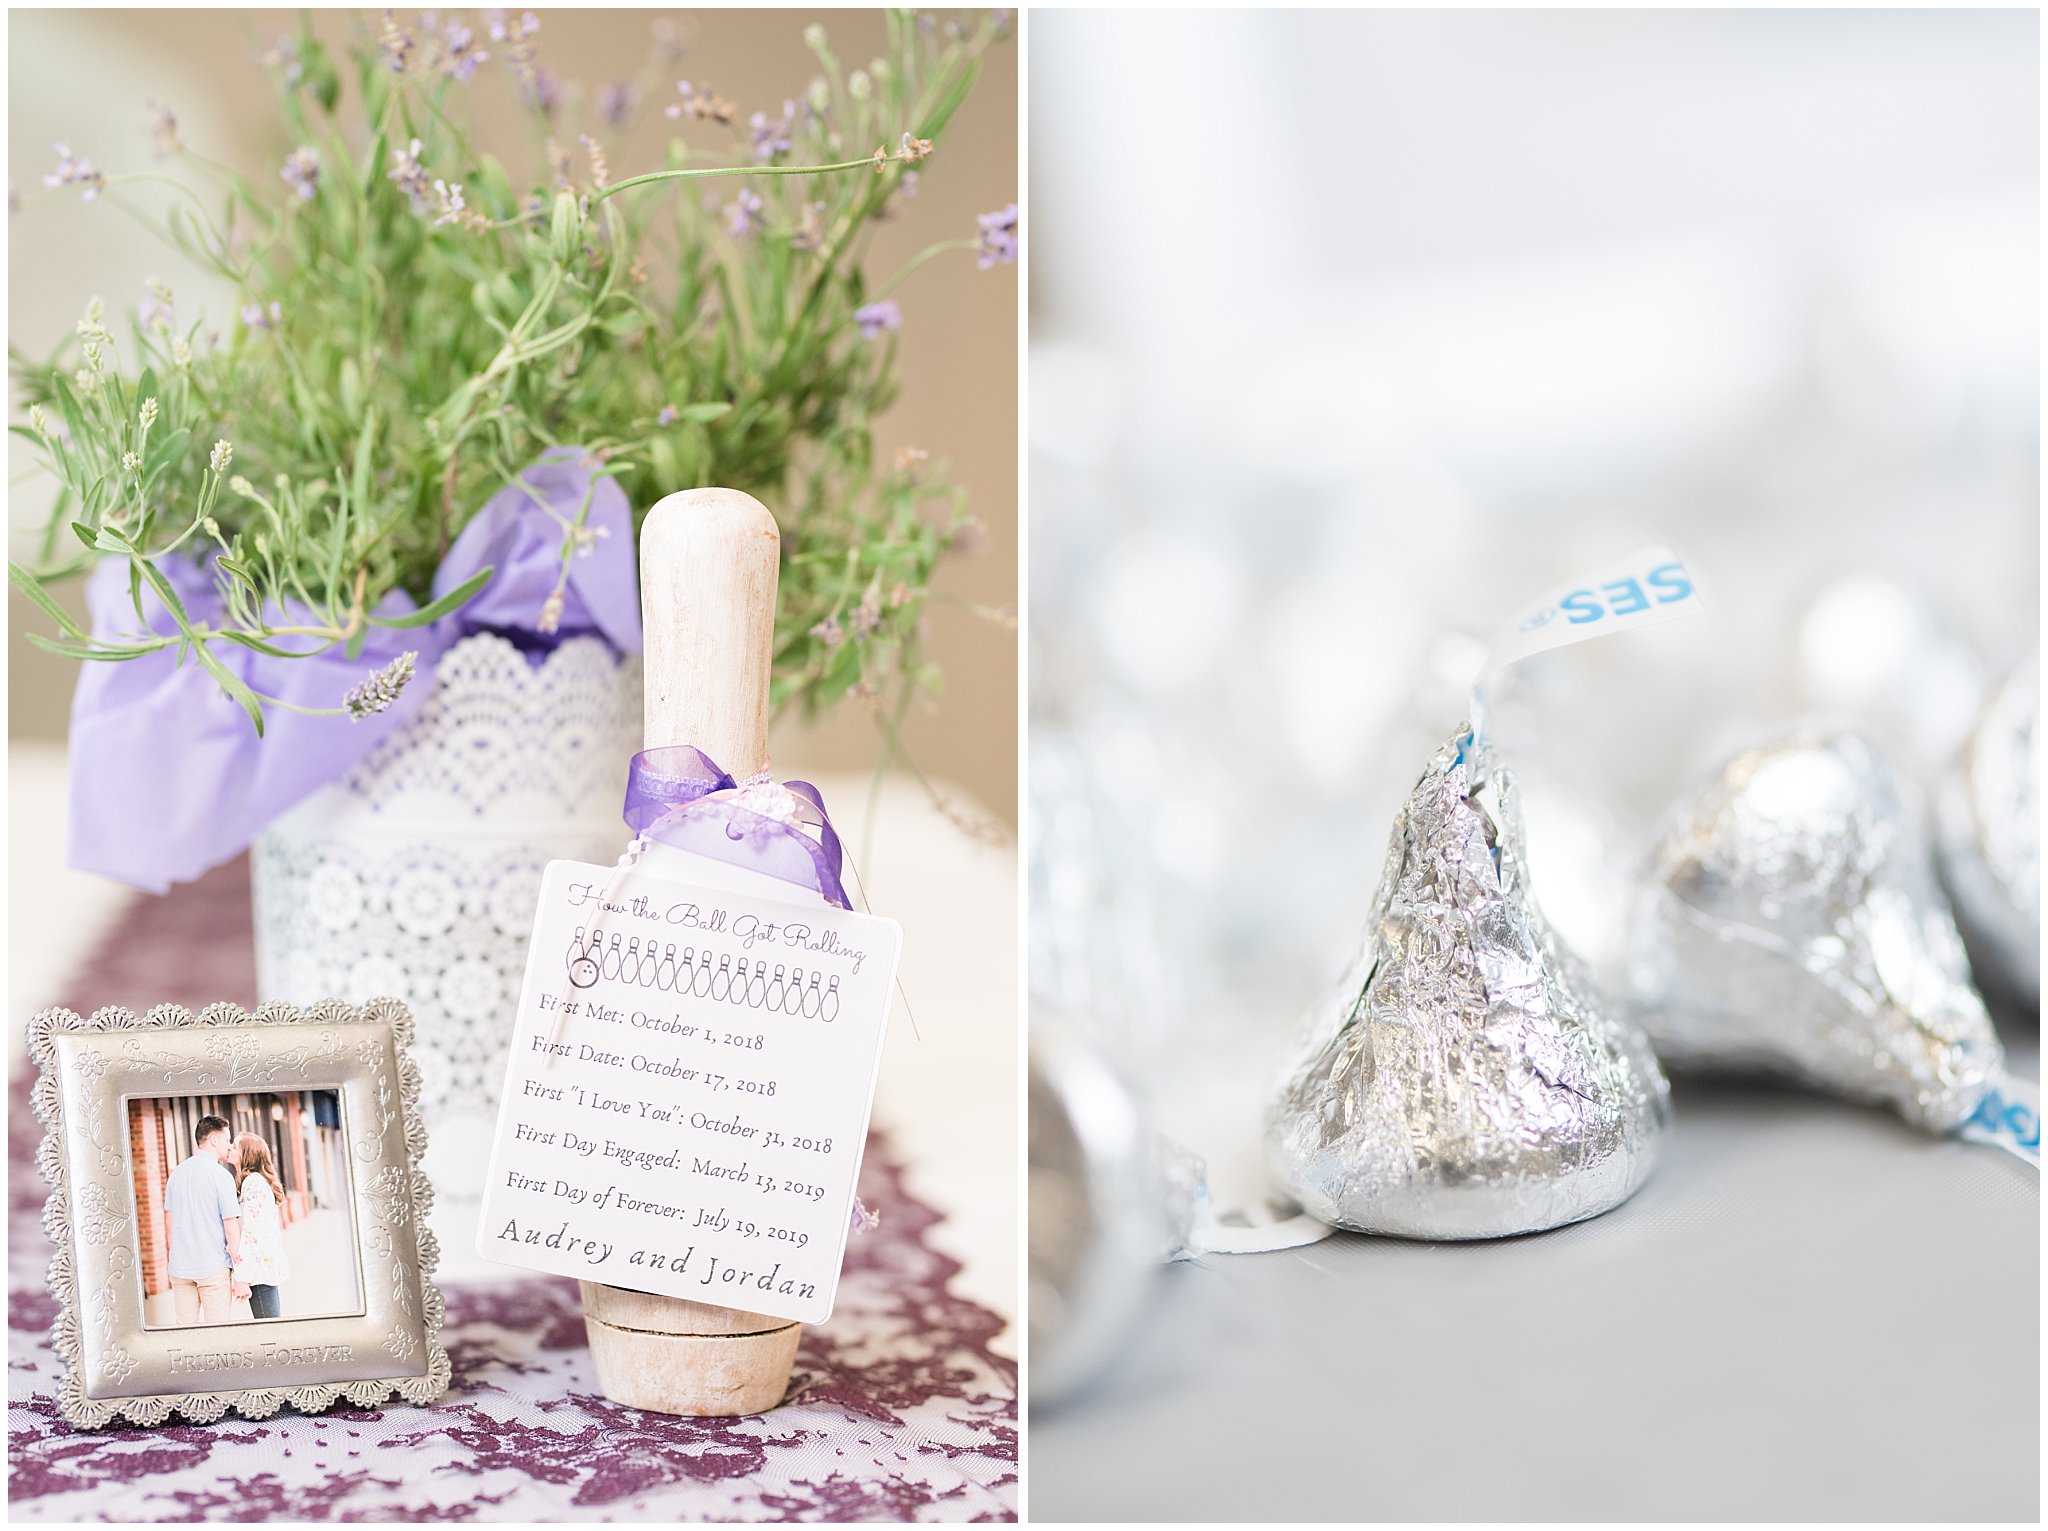 Bowling pin couples story centerpiece decor | Salt Lake Temple Wedding and Clearfield City Hall Reception | Utah Wedding Photographers | Jessie and Dallin Photography